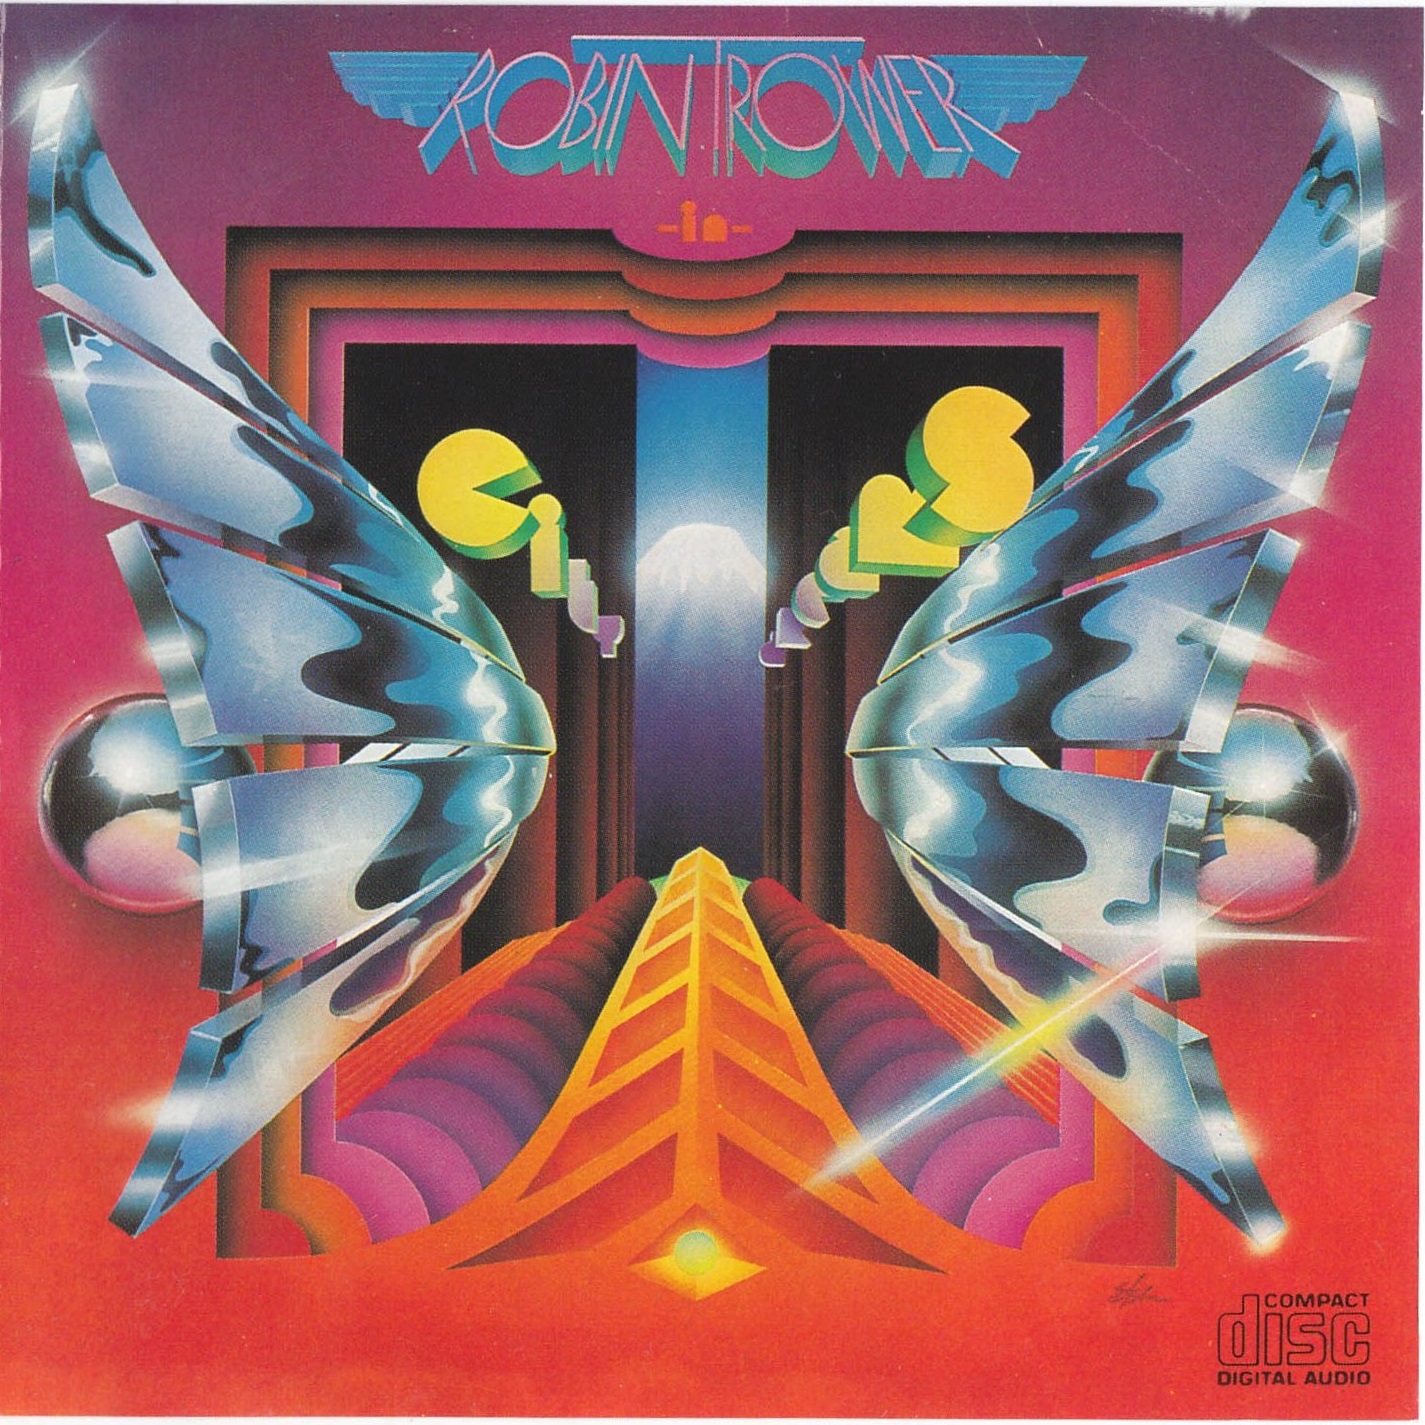 Robin Trower - Discography (1972 - 2022)